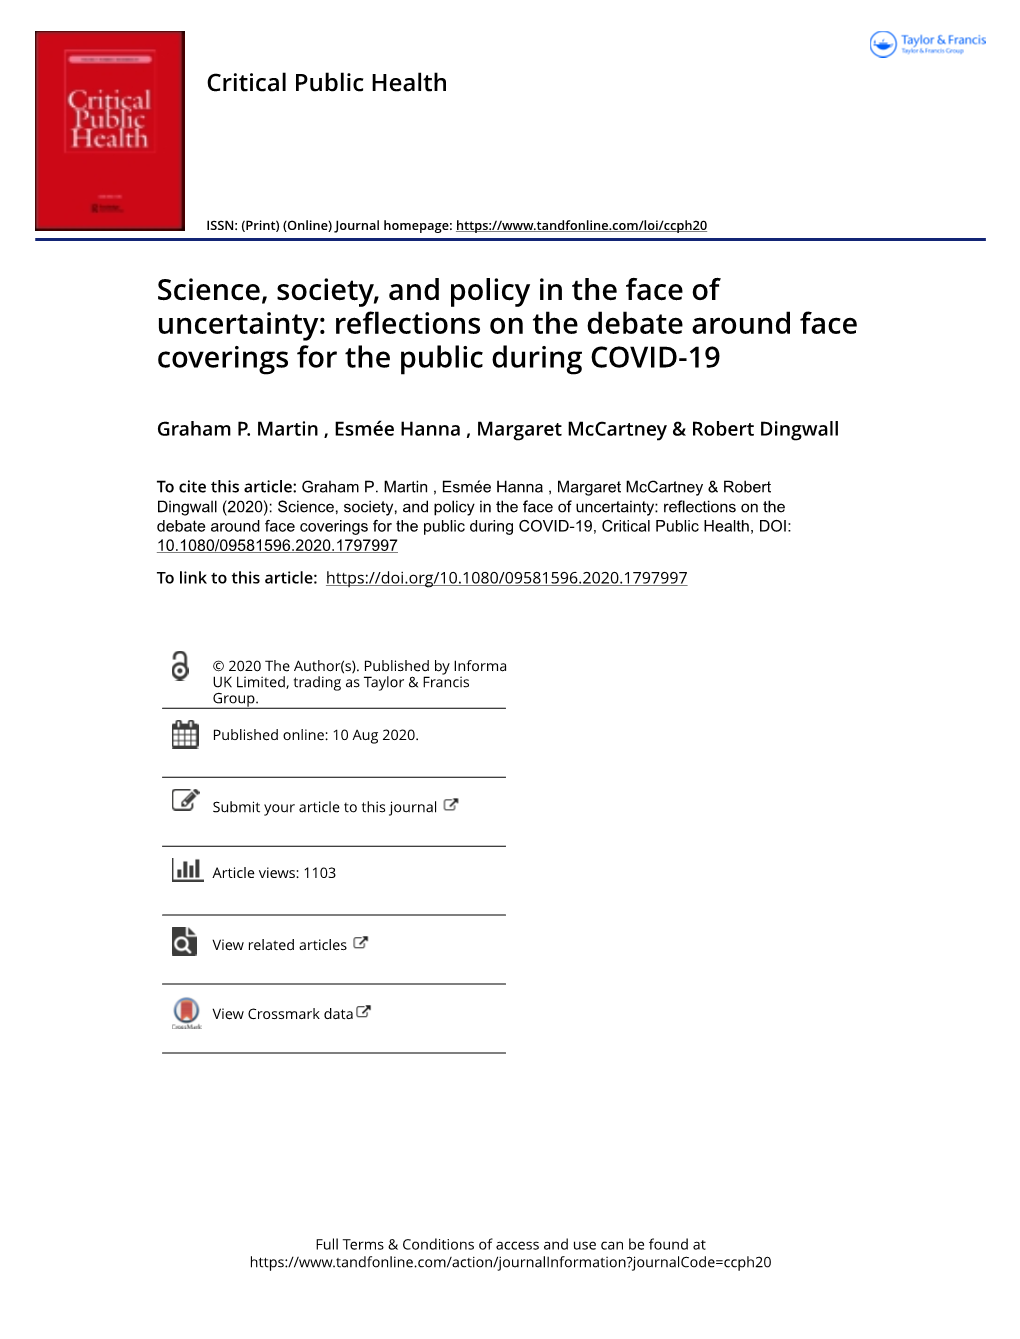 Science, Society, and Policy in the Face of Uncertainty: Reflections on the Debate Around Face Coverings for the Public During COVID-19